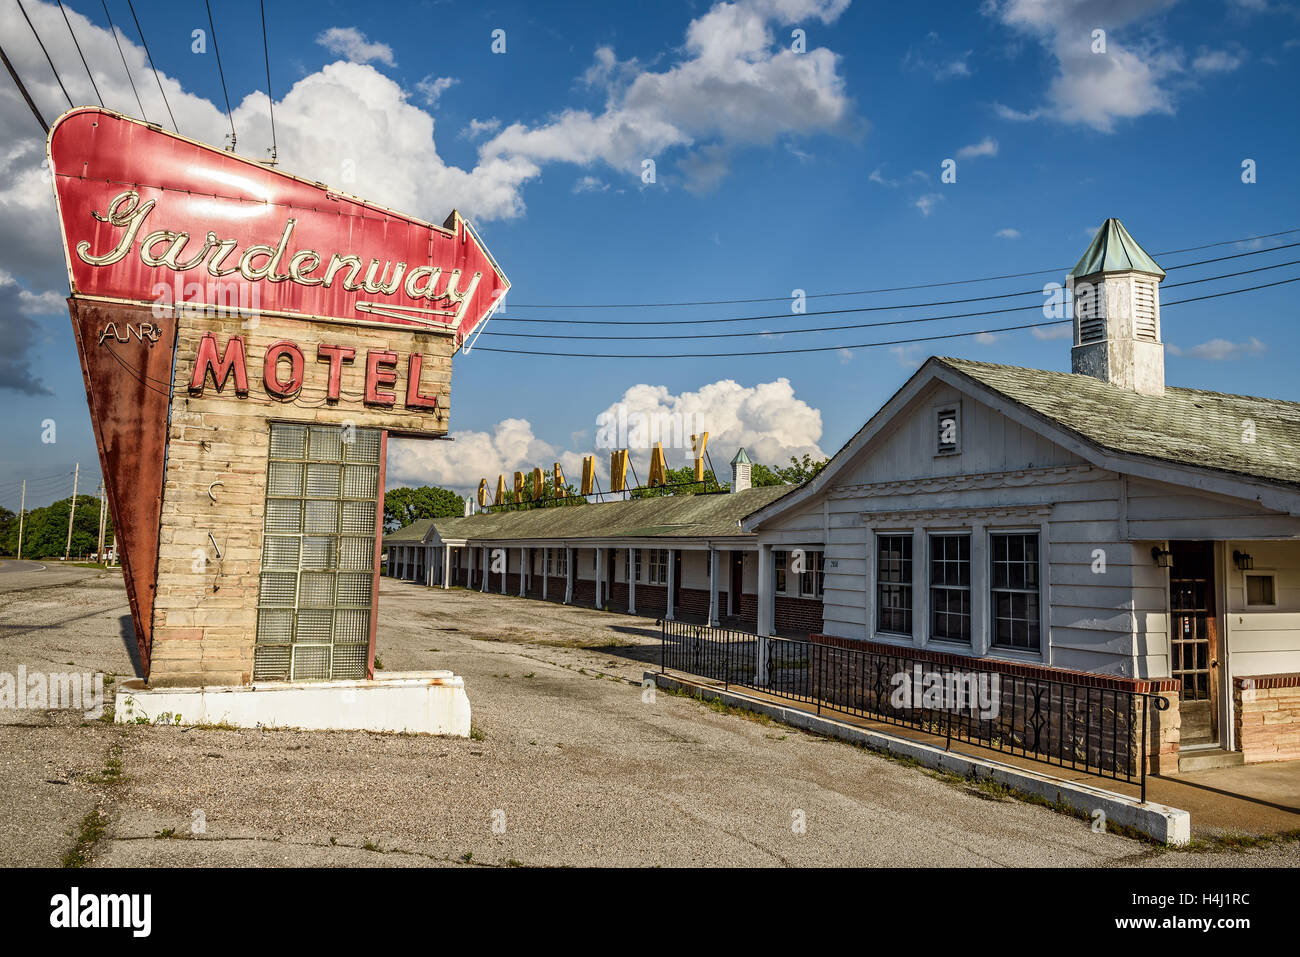 Abandoned Gardenway Motel and vintage neon sign on historic Route 66 in Missouri Stock Photo